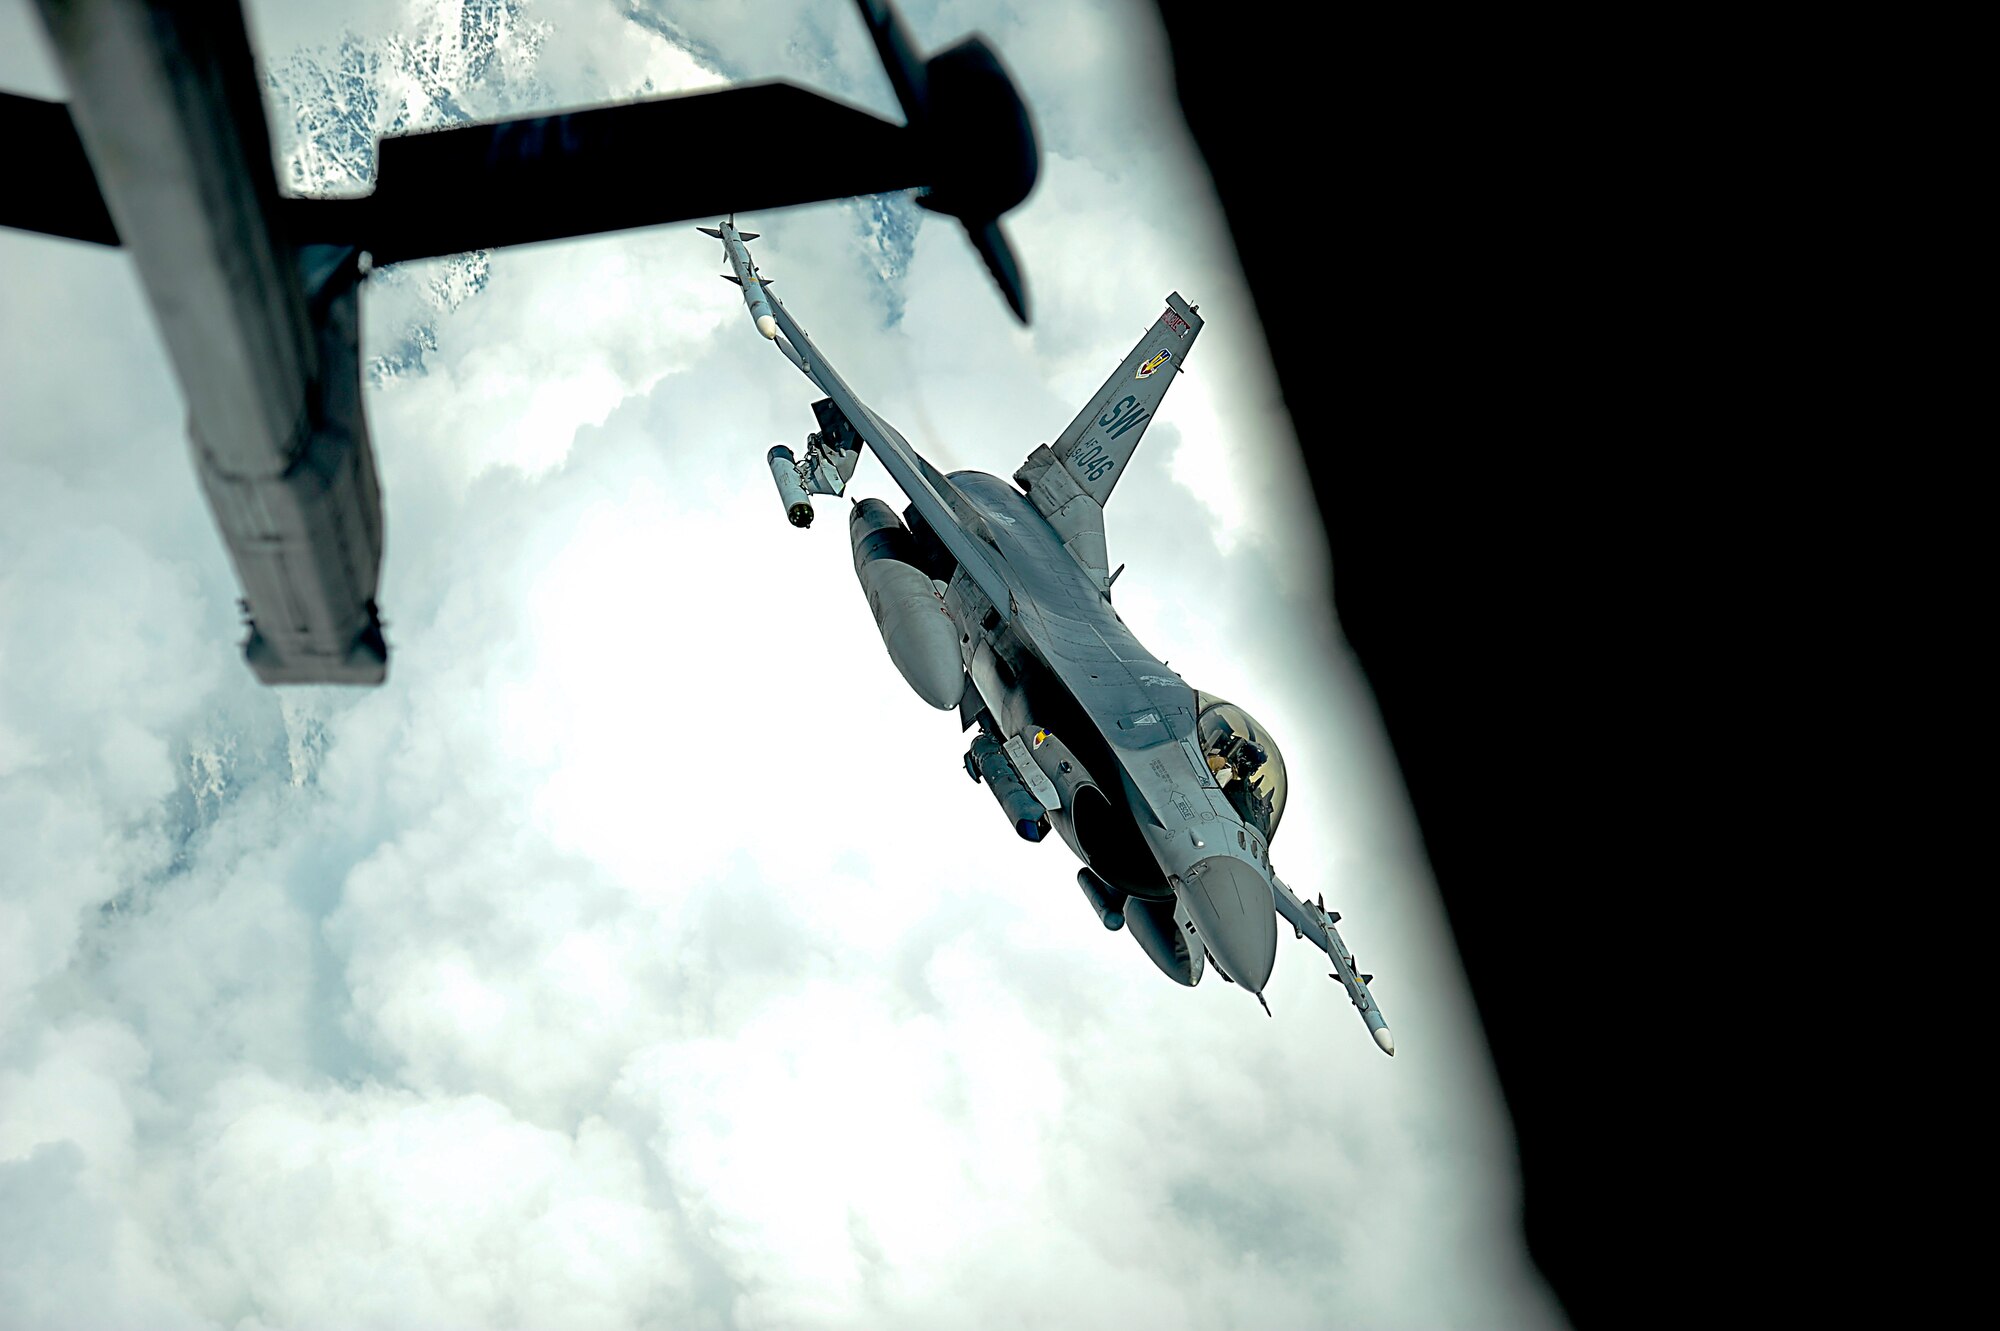 A U.S. Air Force F-16 Fighting Falcon assigned to the 455th Air Expeditionary Wing, Bagram Airfield, Afghanistan receives fuel over Afghanistan from a KC-10 Extender, March 9,2018.
 The F-16's provide cover from above for Afghan and coalition forces on the ground, deterring insurgent activity. The F-16 can fly more than 500 miles, deliver its weapons with superior accuracy and defend itself against enemy aircraft.
 (U.S. Air Force photo by Tech. Sgt. Anthony Nelson Jr.)